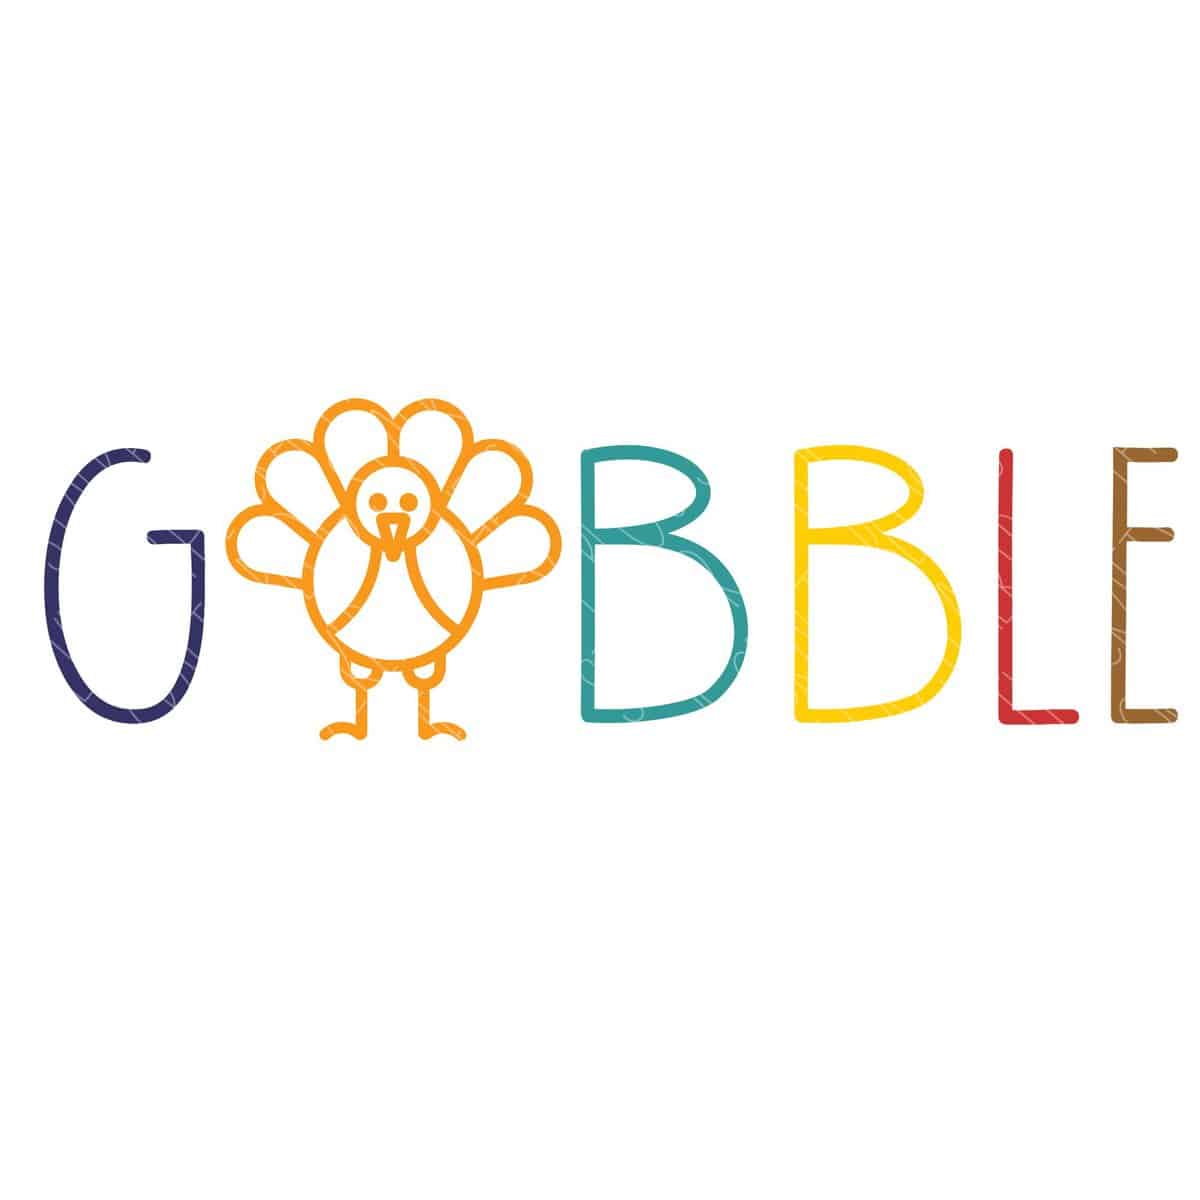 Gobble SVG	

			
		
	

		
			$3.00 – Buy Now Checkout
							
					
						
							
						
						Added to cart